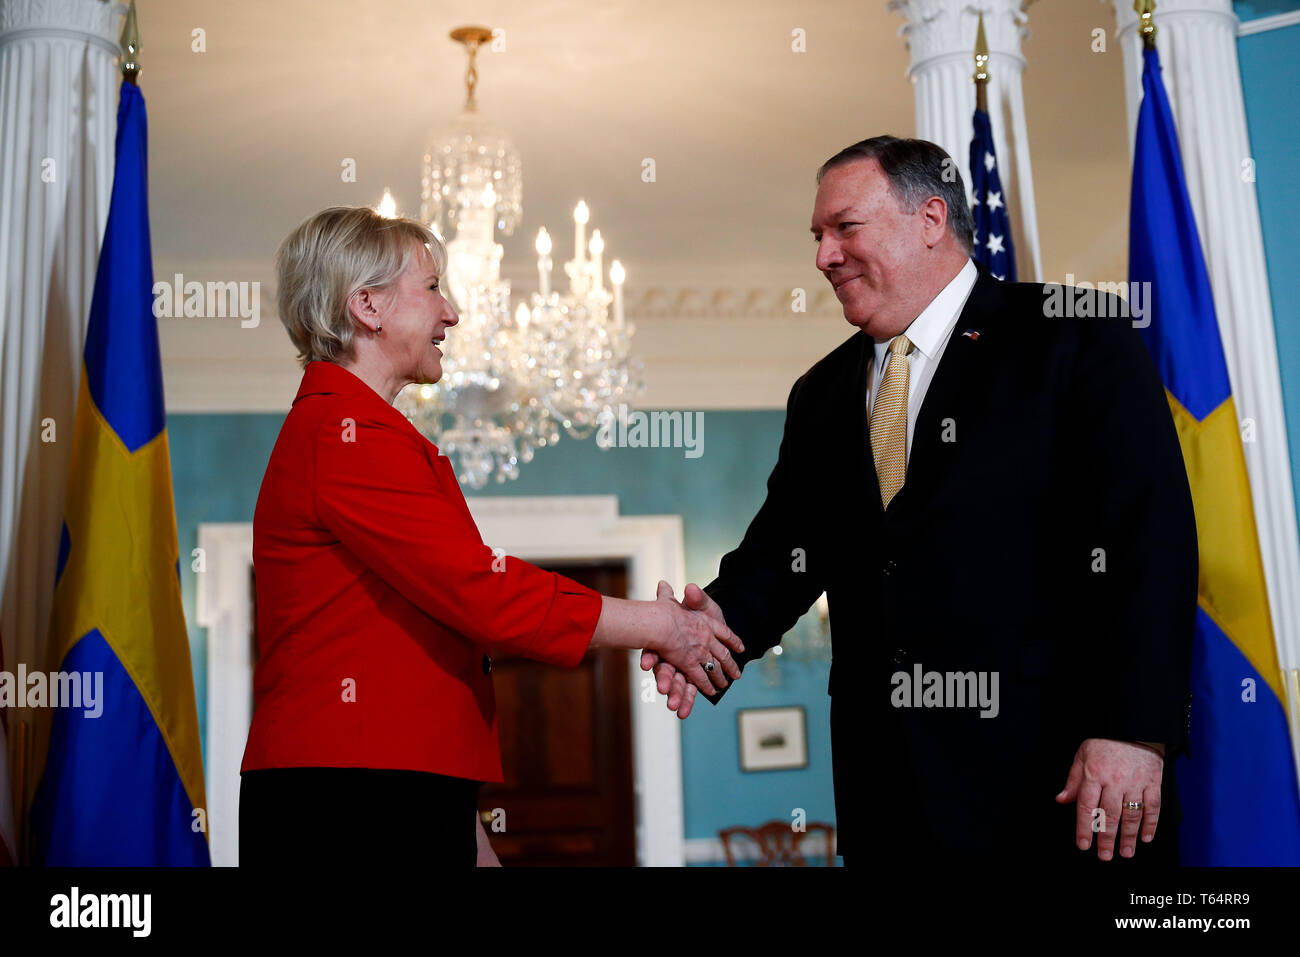 Washington, USA. 29th Apr, 2019. U.S. Secretary of State Mike Pompeo (R) meets with Swedish Foreign Minister Margot Wallstrom at the Department of State in Washington, DC, the United States, on April 29, 2019. Credit: Ting Shen/Xinhua/Alamy Live News Stock Photo